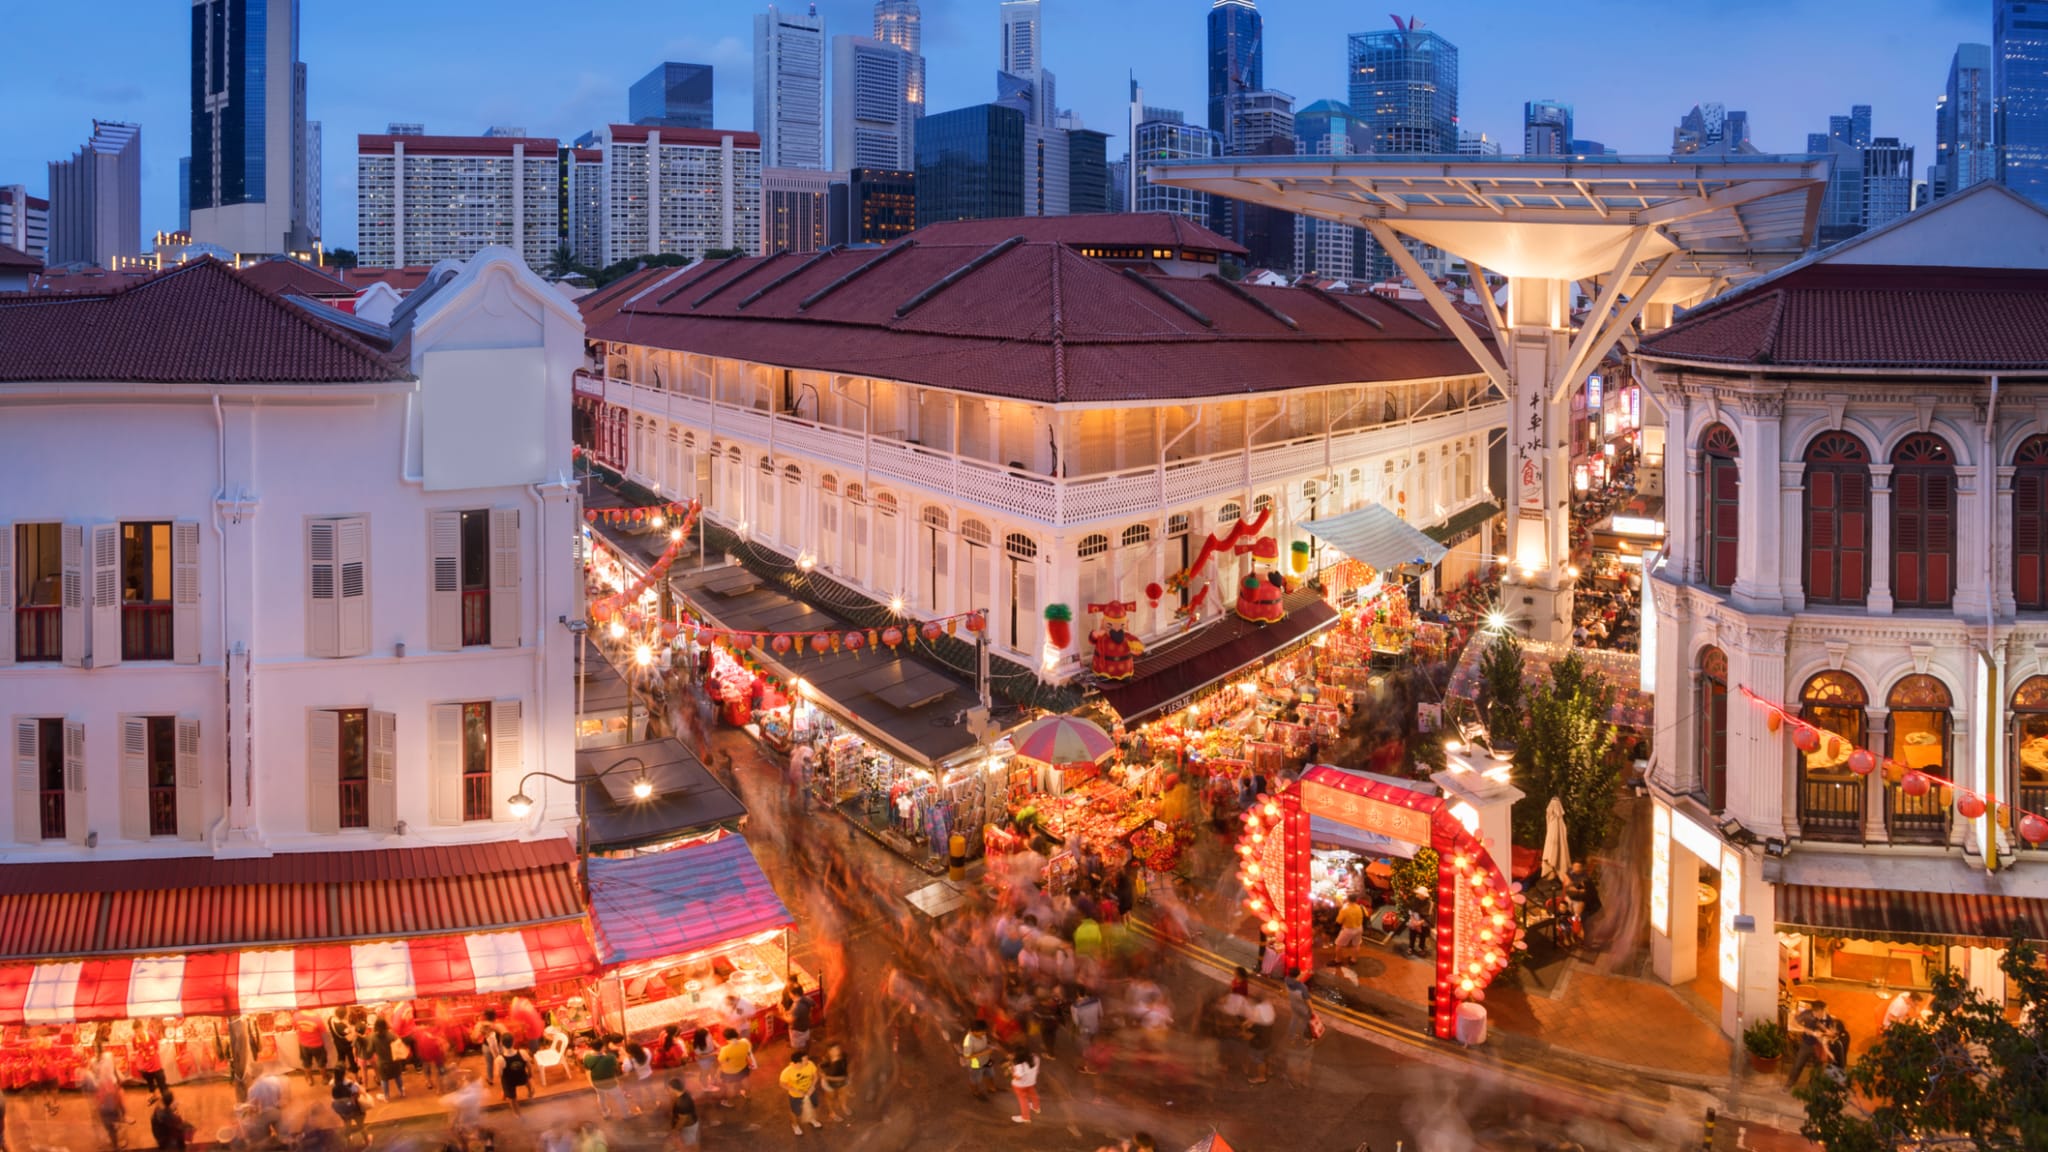 Nachtmarkt in Singapur ©fiftymm99/Moment via Getty Images